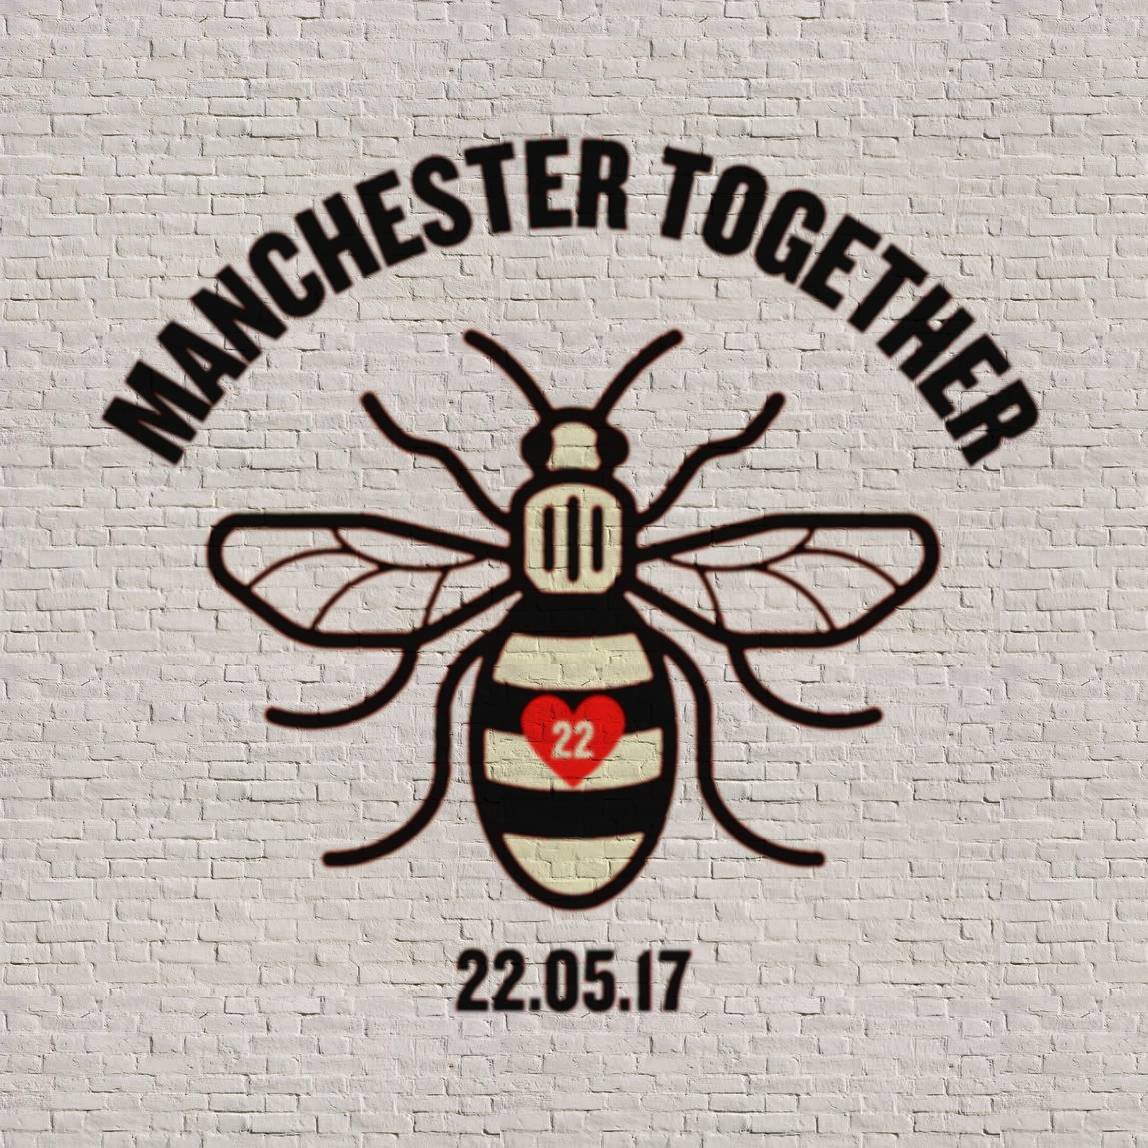 7 years since this day has become so poignant to us, always a difficult day. As always, our hearts are with 22 families. Sending love to our friends who are also remembering today 🤍🐝 #WeStandTogether #Manchester